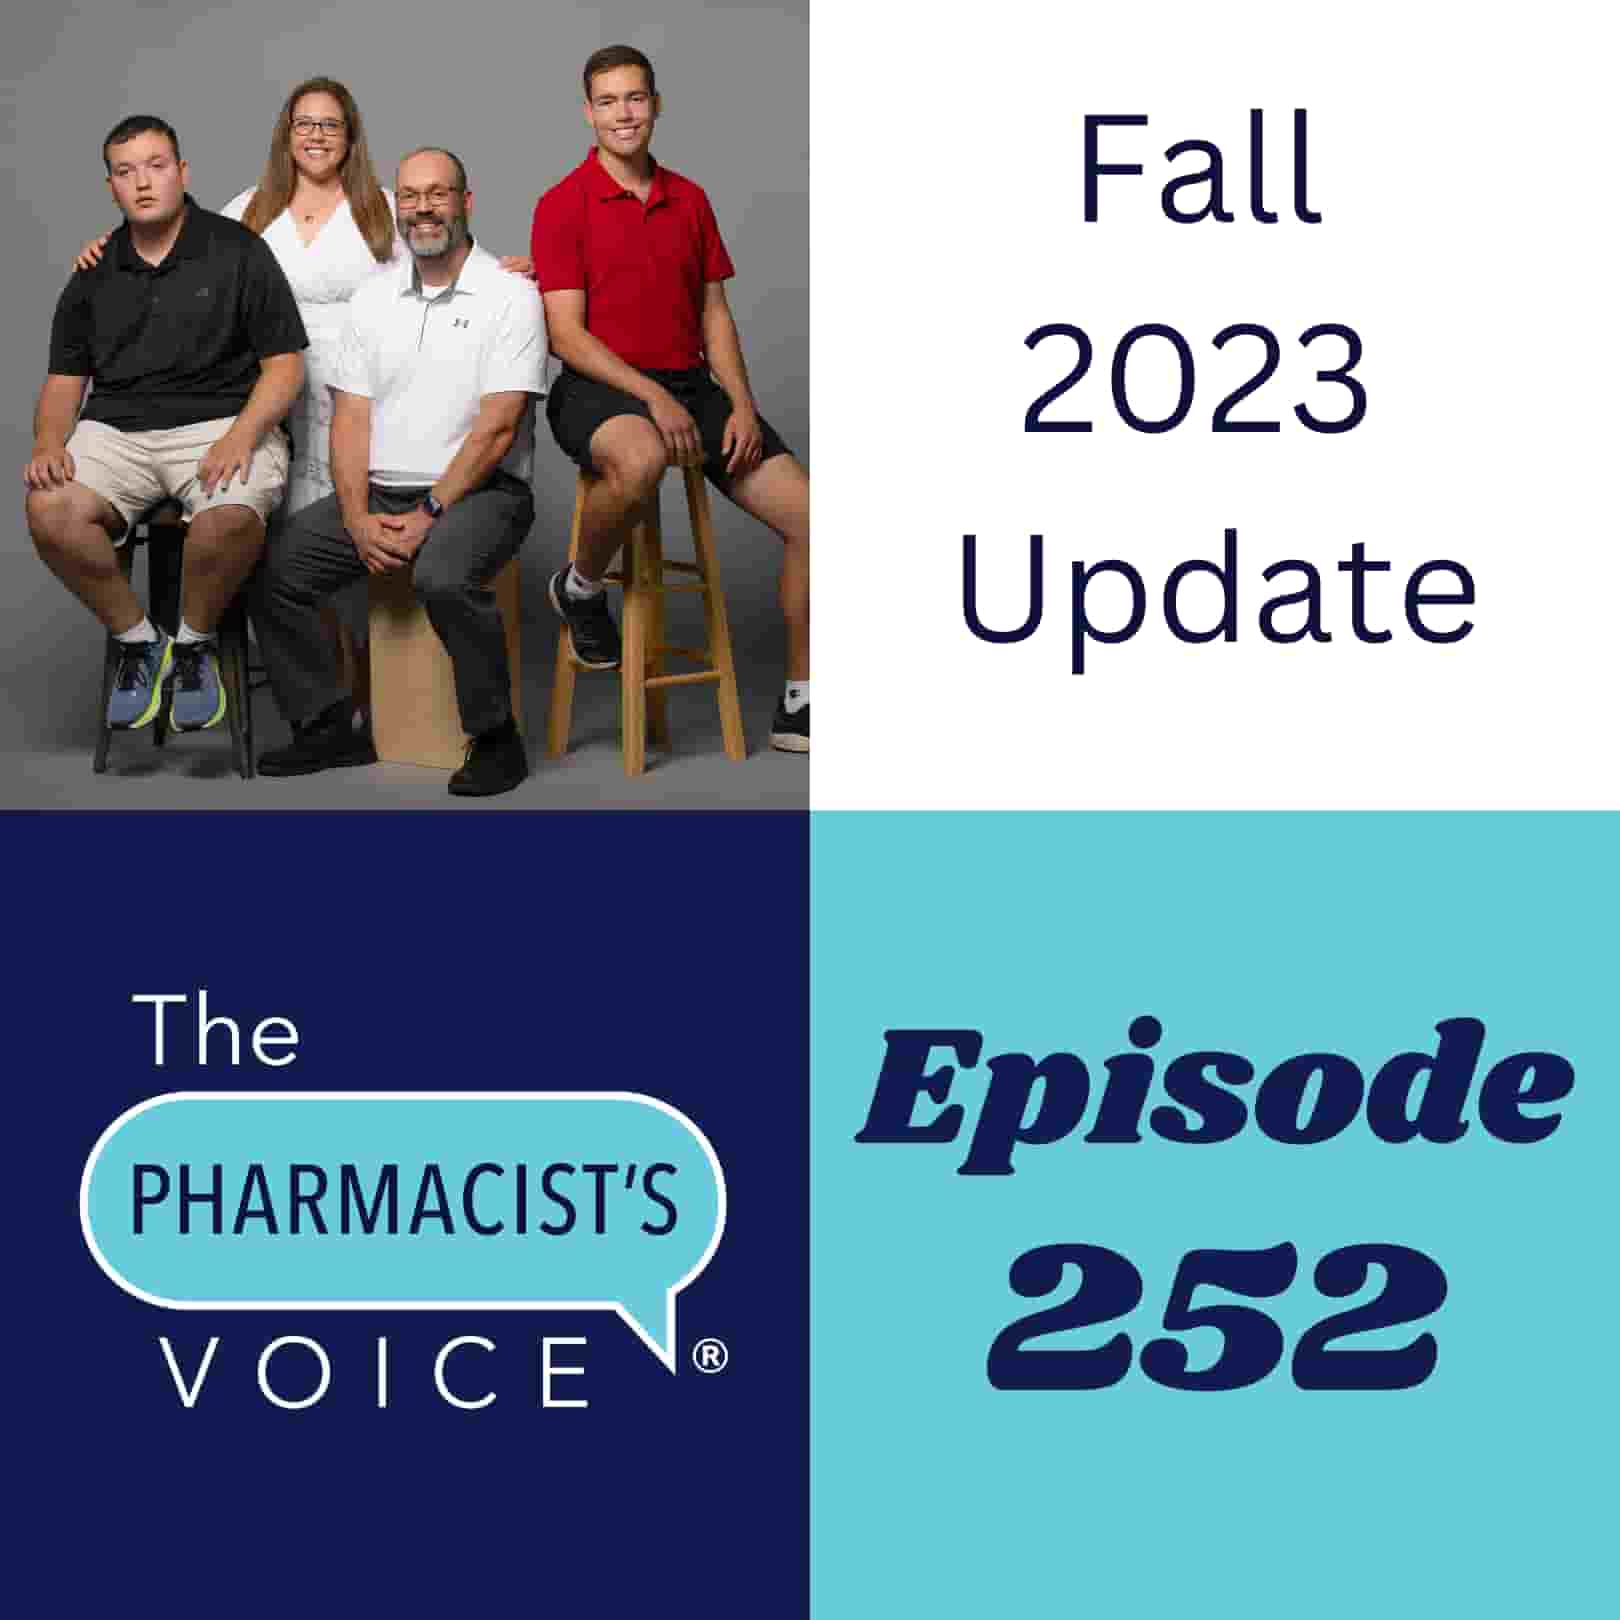 The Pharmacist's Voice Podcast Episode 252. Fall 2023 Update.